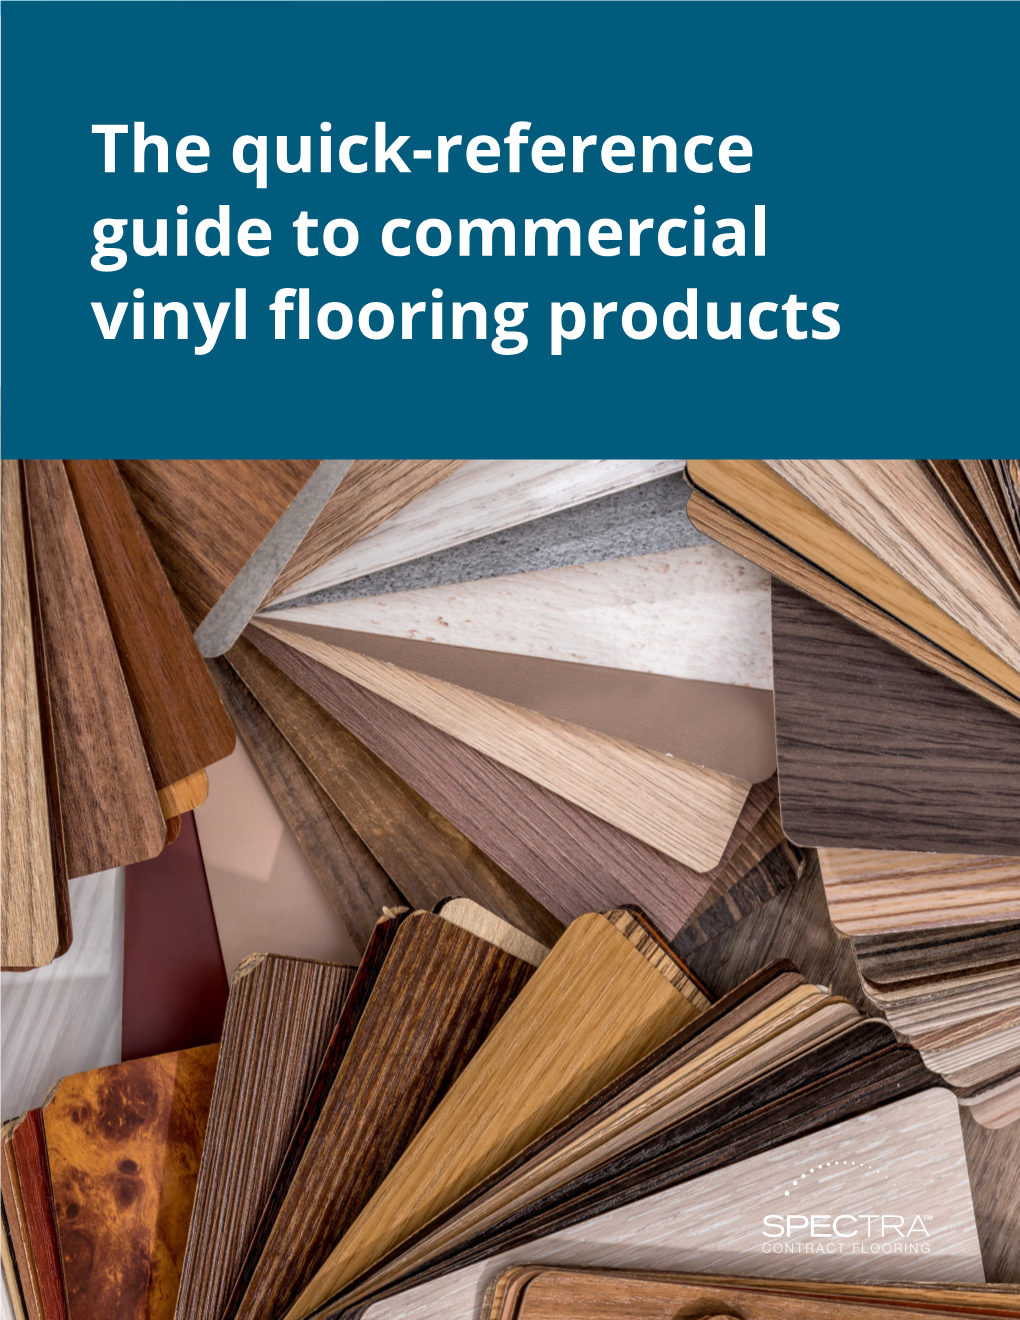 The Quick-Reference Guide to Commercial Vinyl Flooring Products